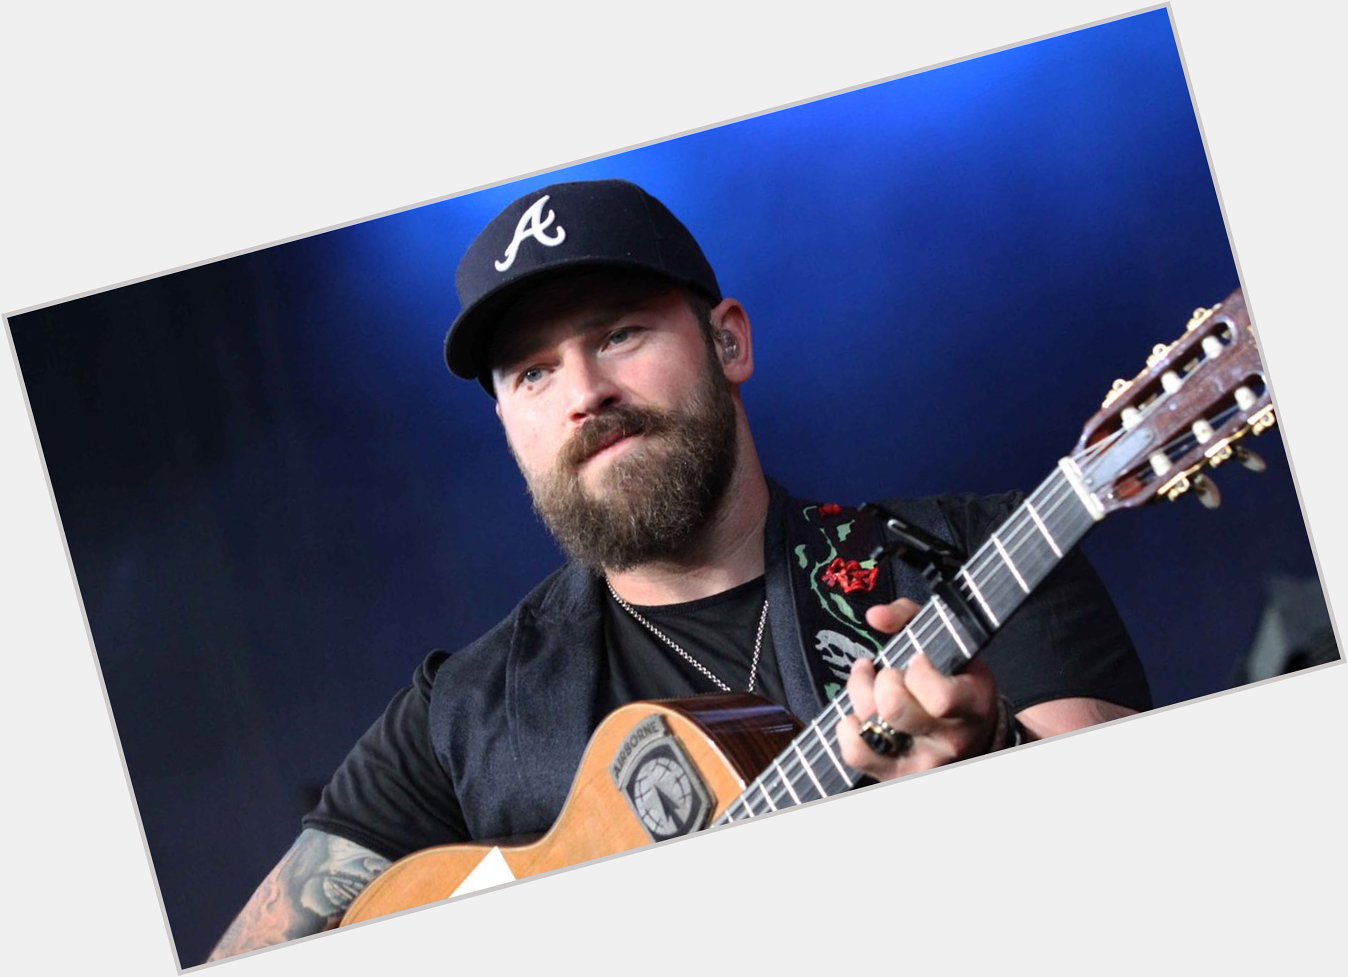 Cake and a little bit of chicken fried...
Happy birthday, Zac Brown of the 41 today. (7/31) 